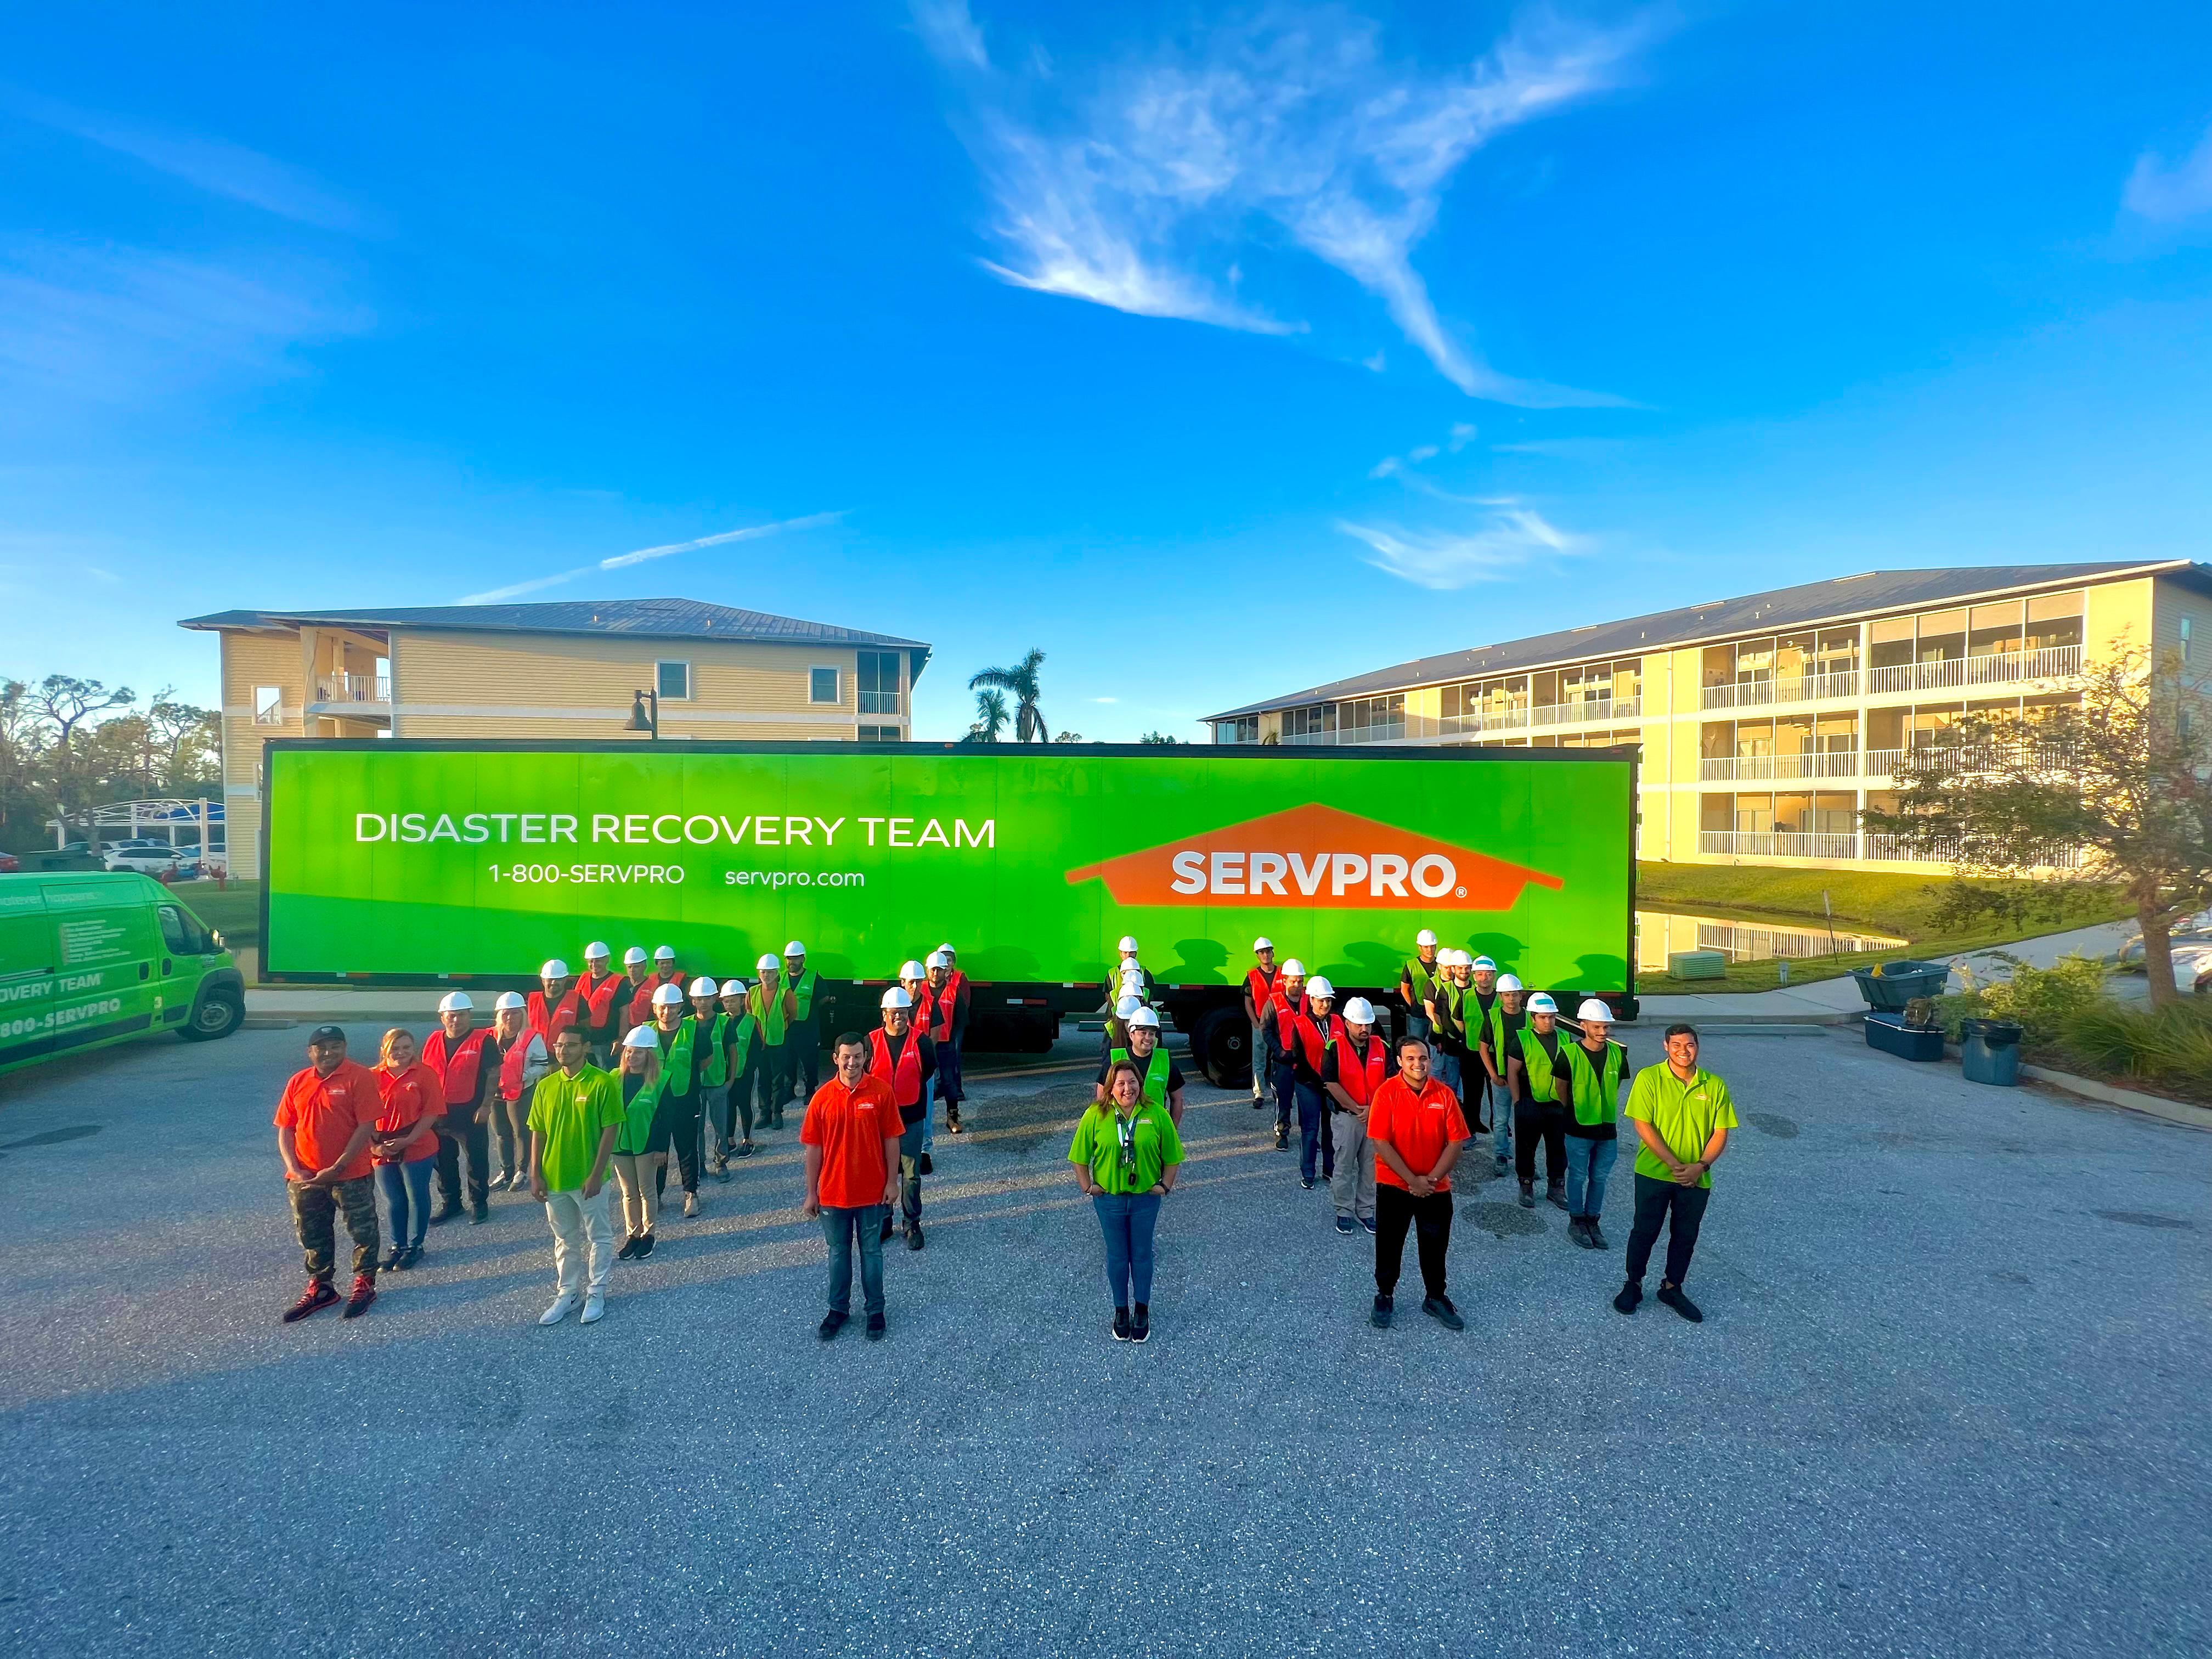 SERVPRO of Affton/ Webster Grove   is always ready to help. Our trained and certified fire teams are ready to respond immediately on all types of fire-related emergencies. We'll make sure your home is safe, dry and clean in record time. 💧 🚪 🔥